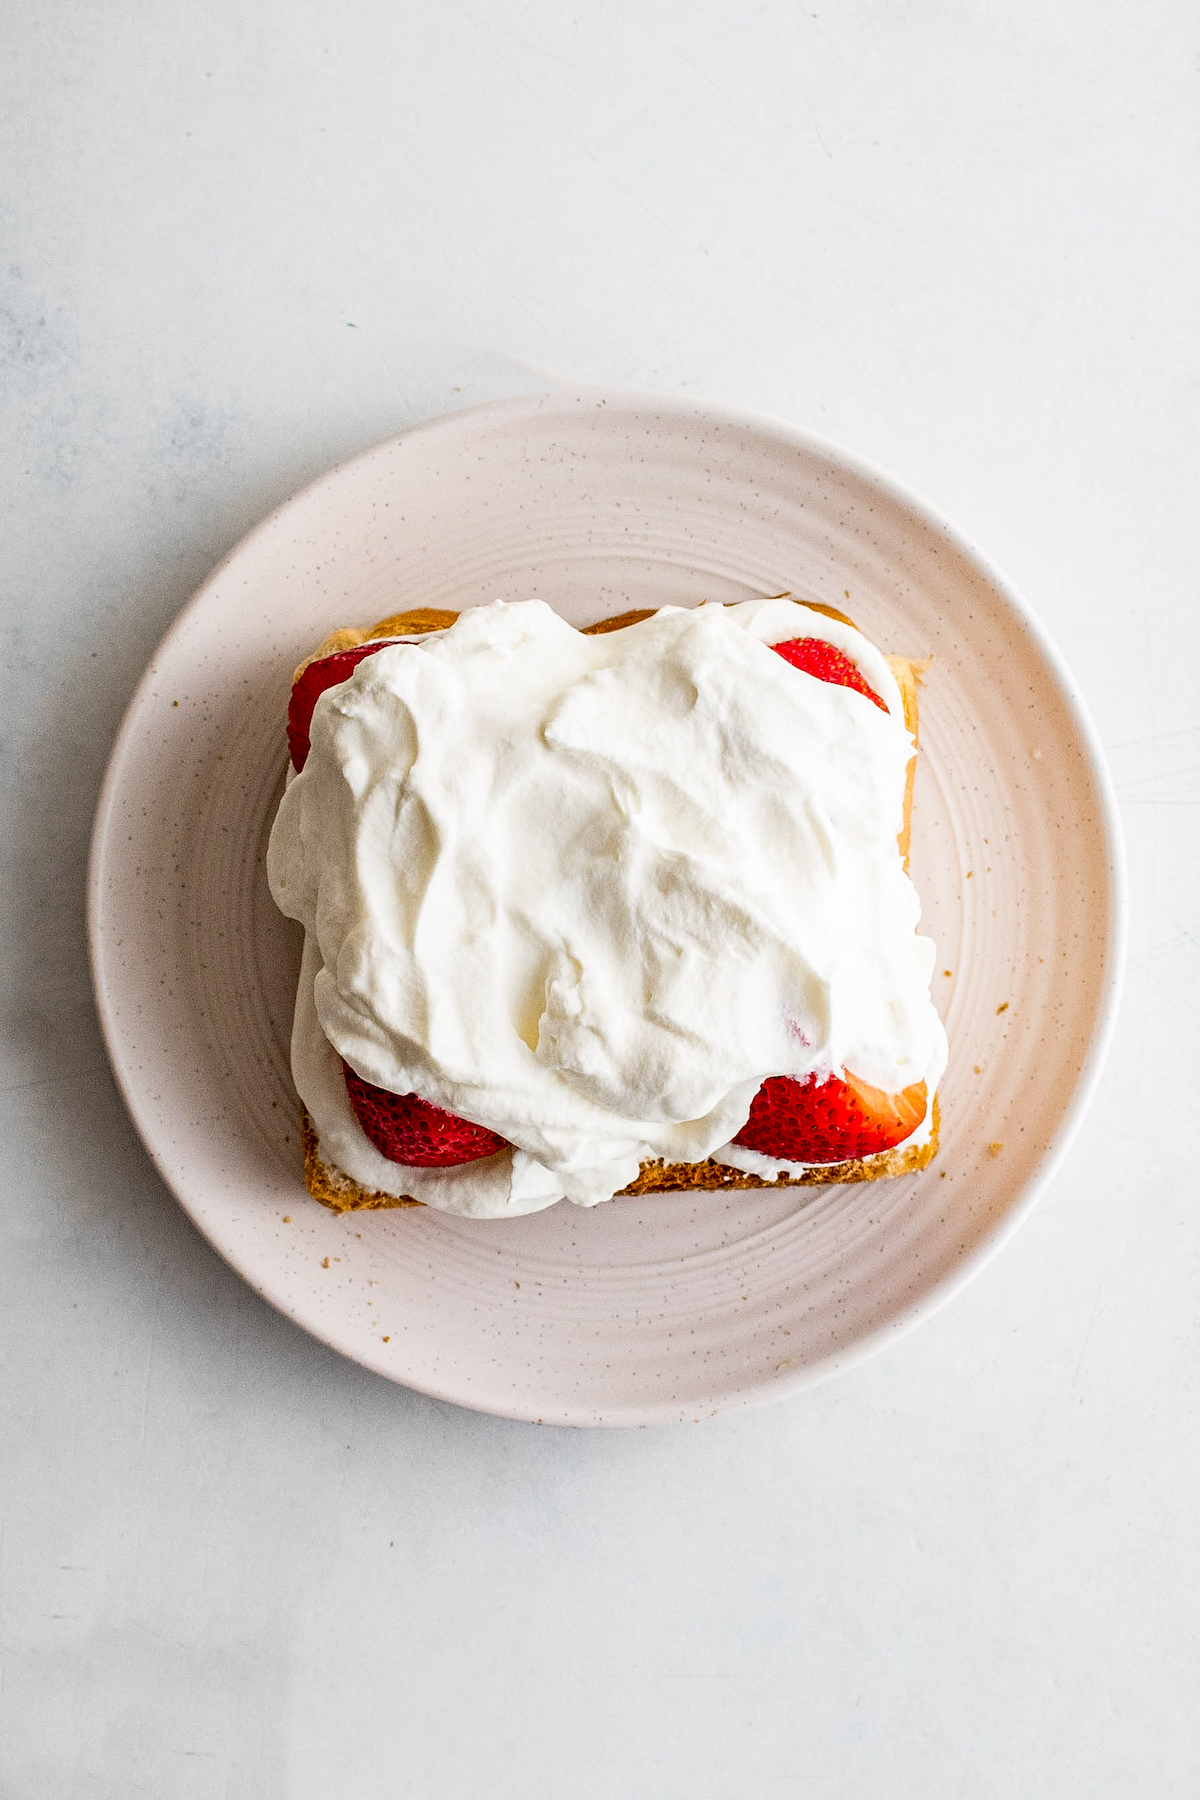 Bread topped with a layer of whipped cream, fruit, and more whipped cream.